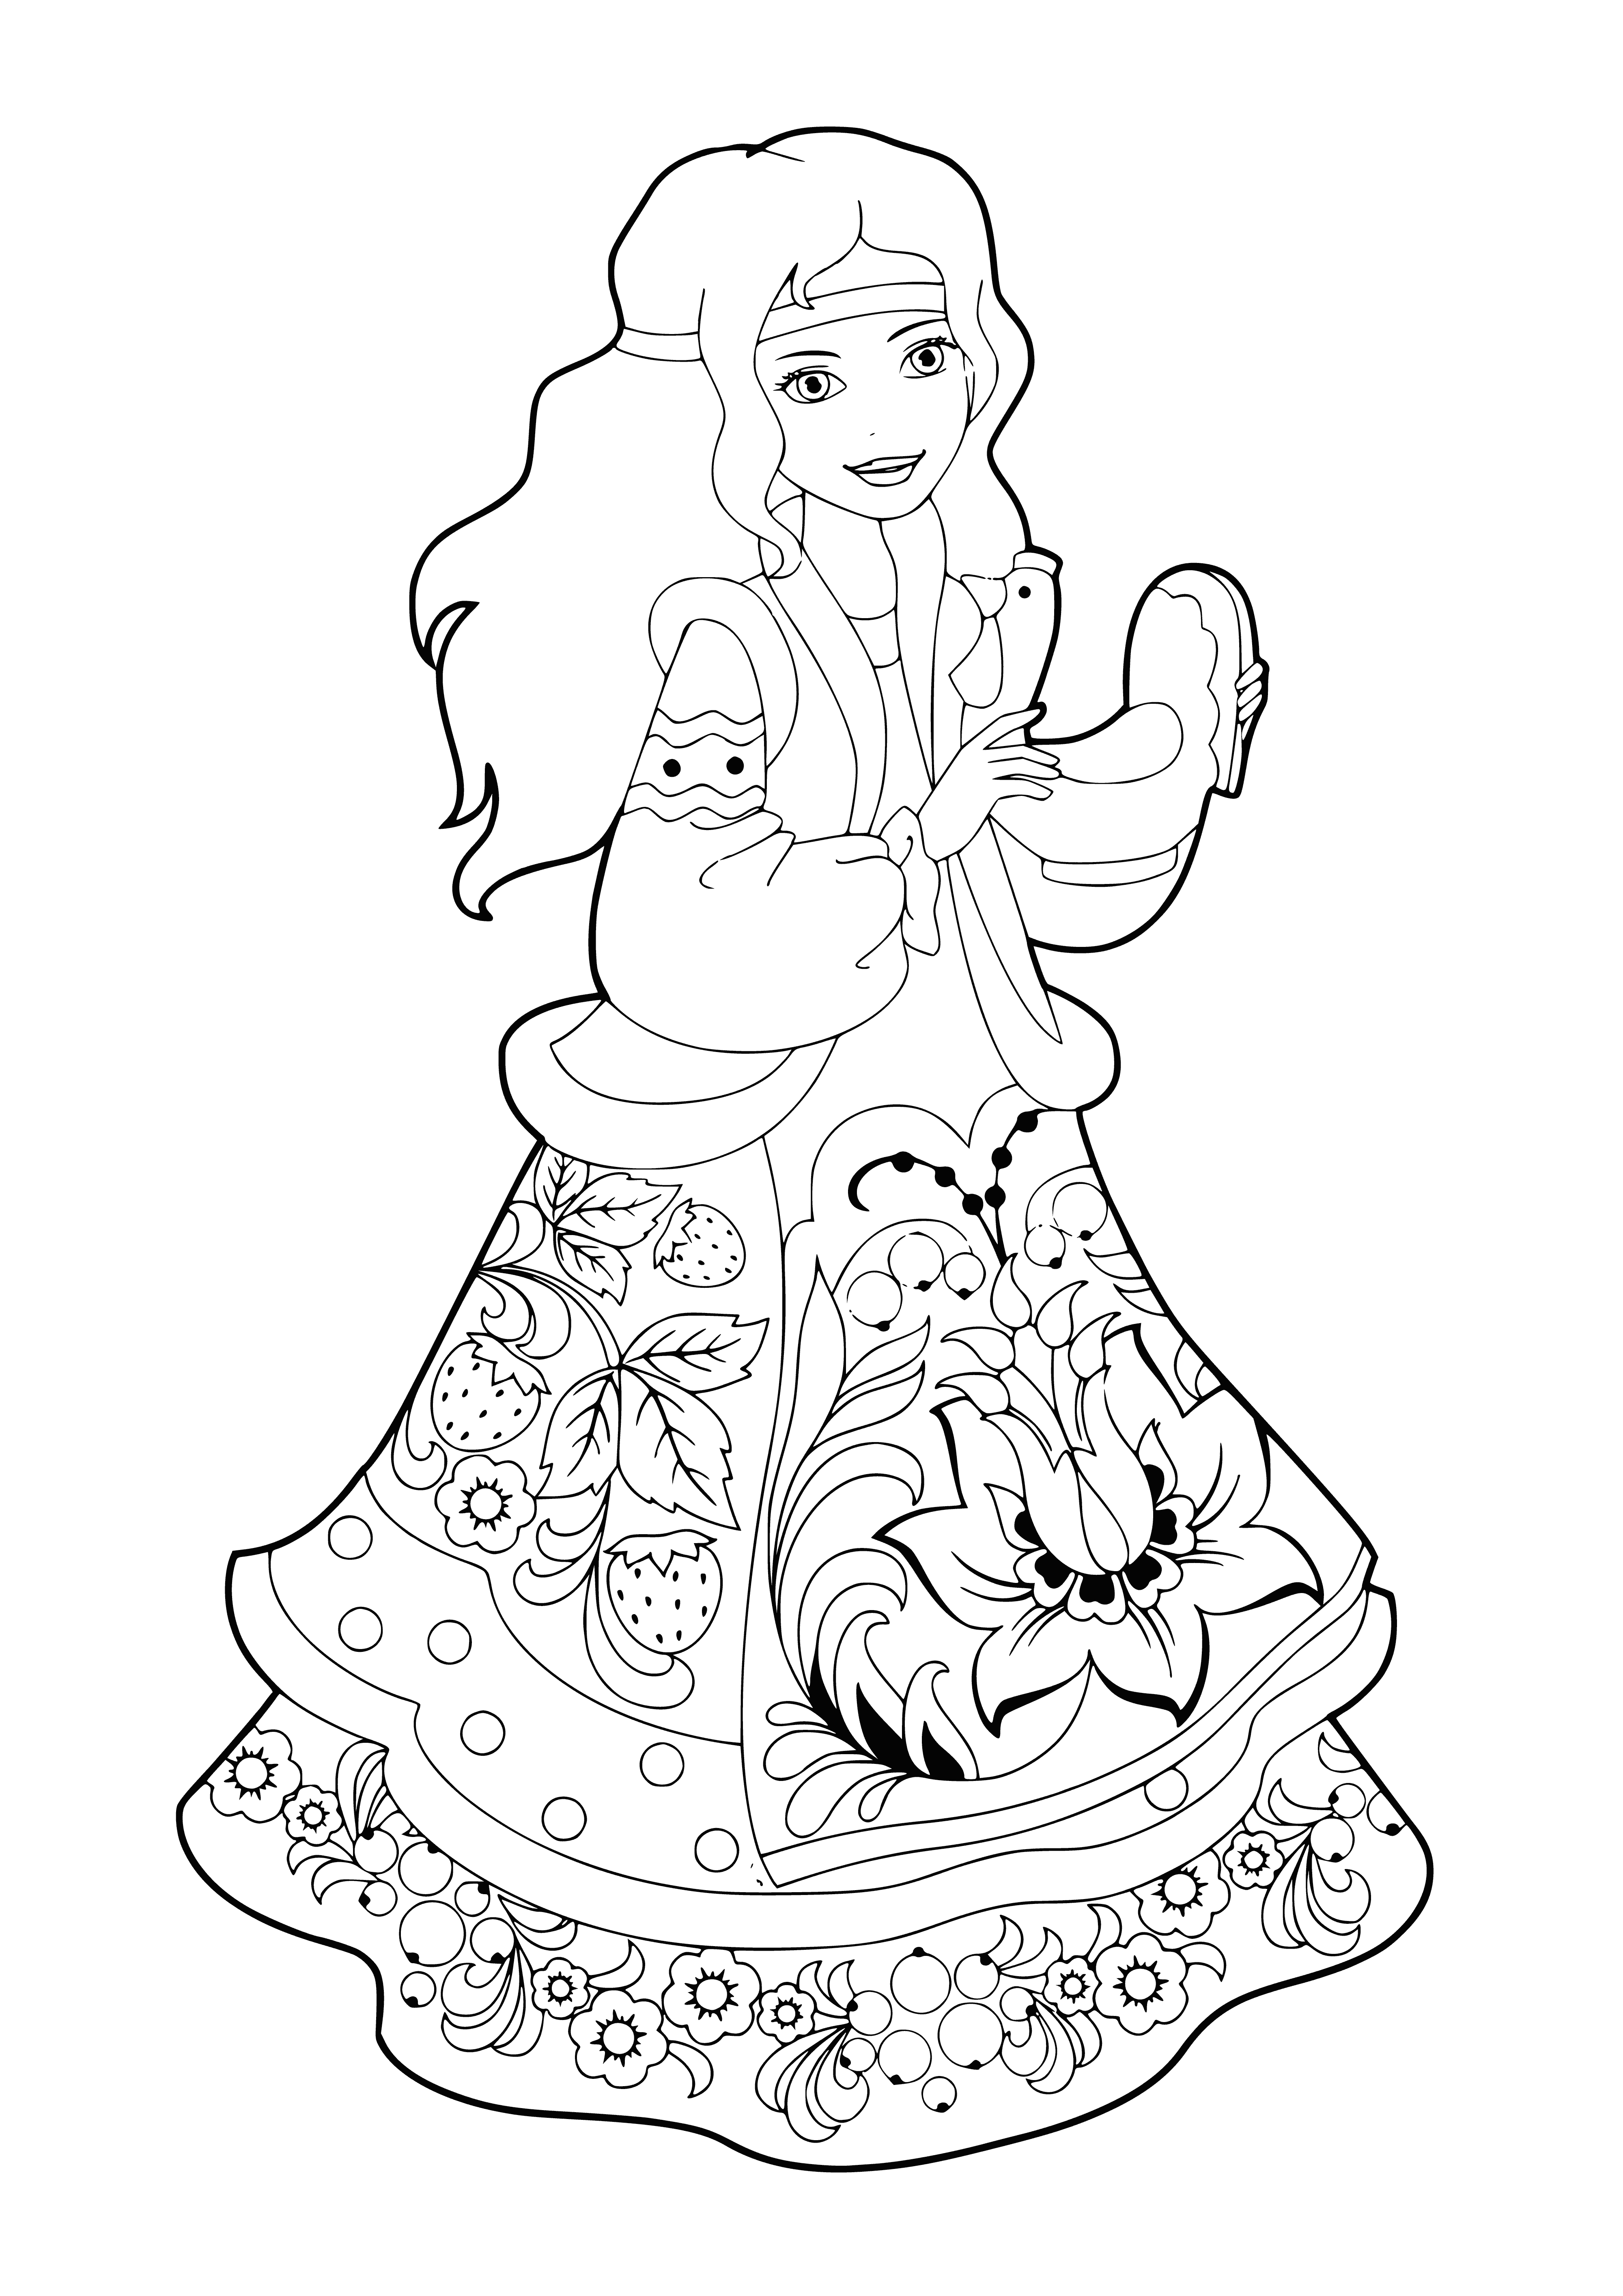 coloring page: Stunning women w/ bright eyes & long hair, wearing gorgeous dresses ready to take on whatever comes their way.